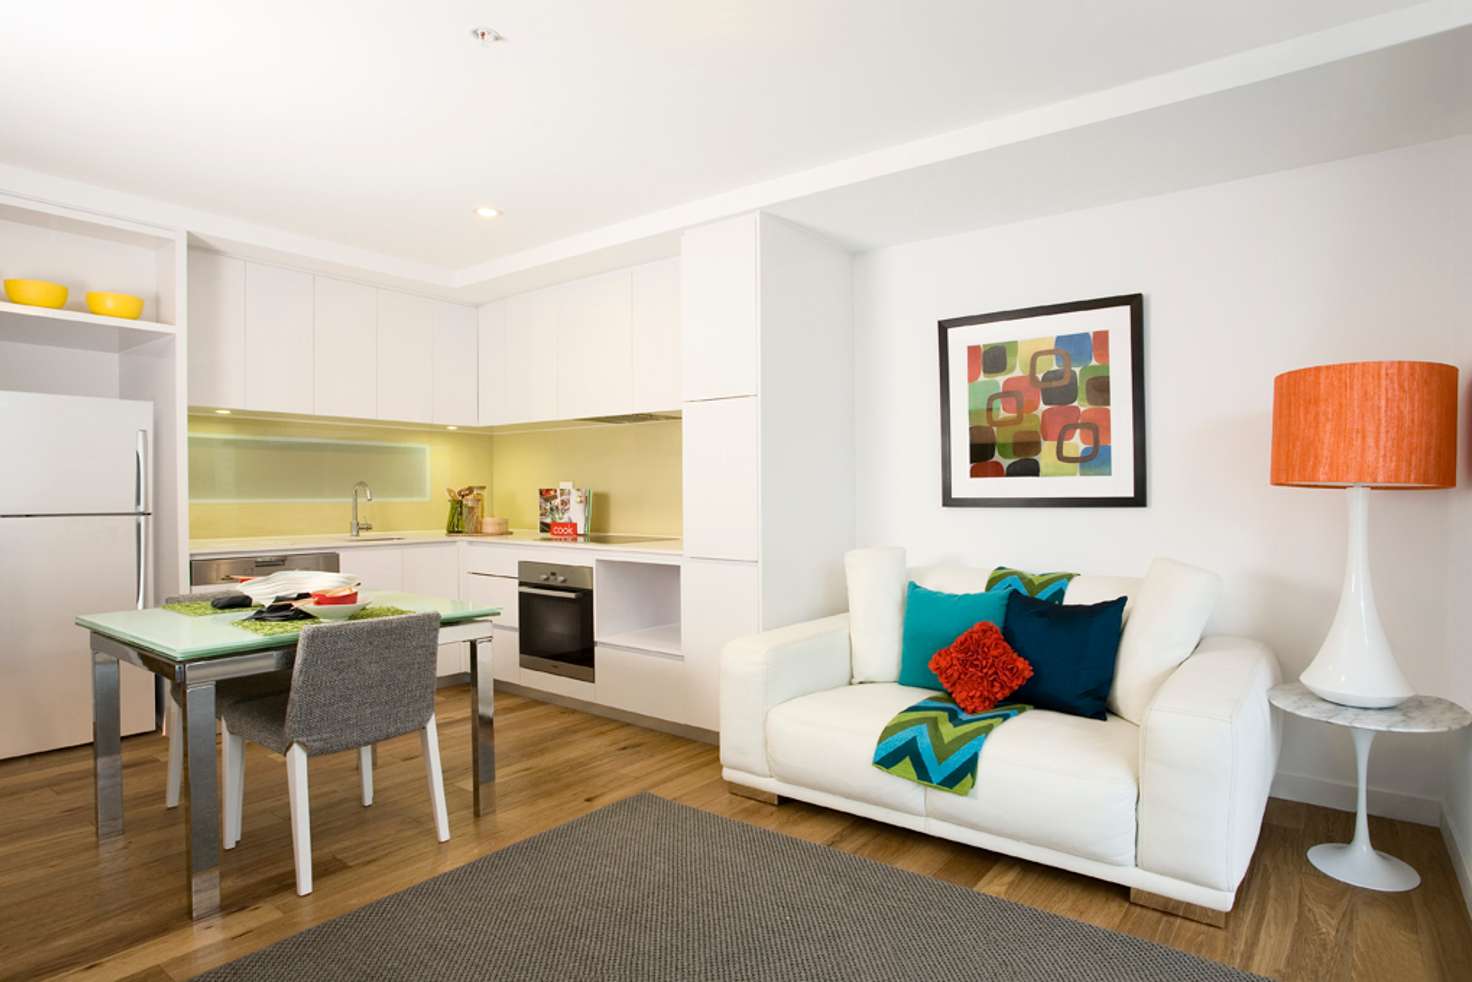 Main view of Homely apartment listing, 124/70 Nott Street, Port Melbourne VIC 3207